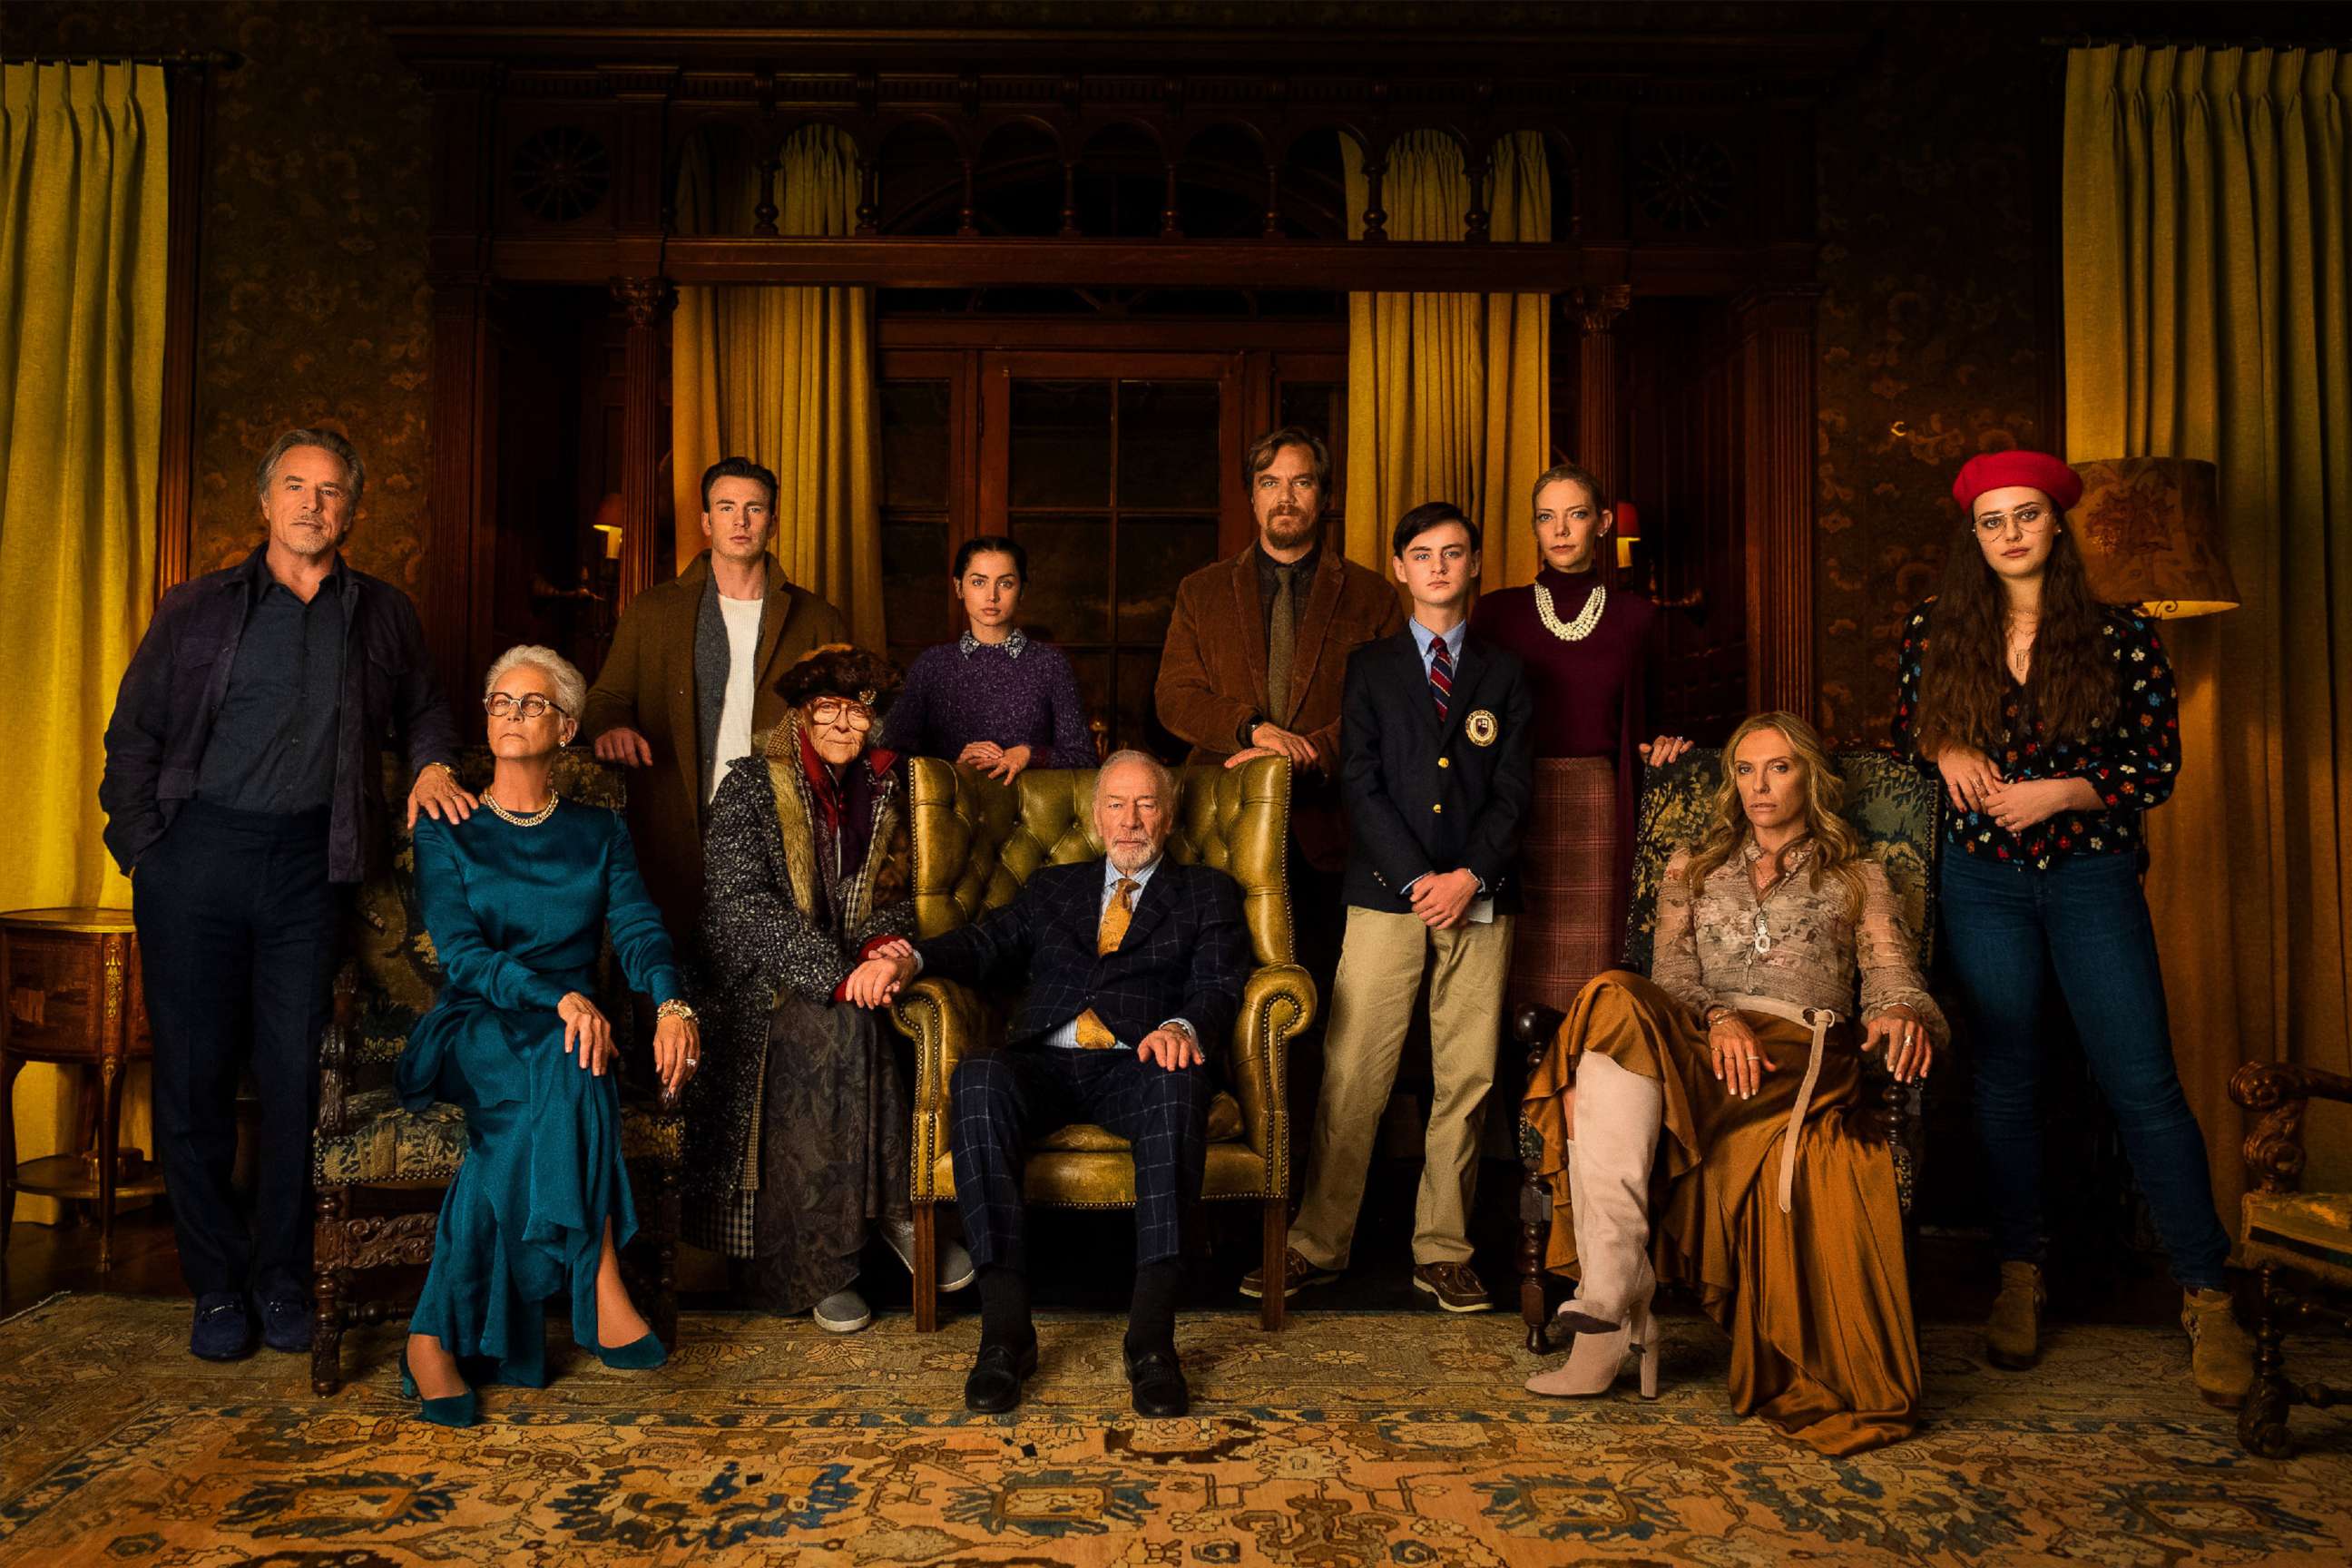 PHOTO: From left to right, Don Johnson, Jamie Lee, Chris Evans, K Callan, Ana de Armas, Christopher Plummer, Michael Shannon, Jaeden Lieberher, Riki Lindholm, Toni Collette and Katherine Langford appear on set of the 2019 movie, "Knives Out."